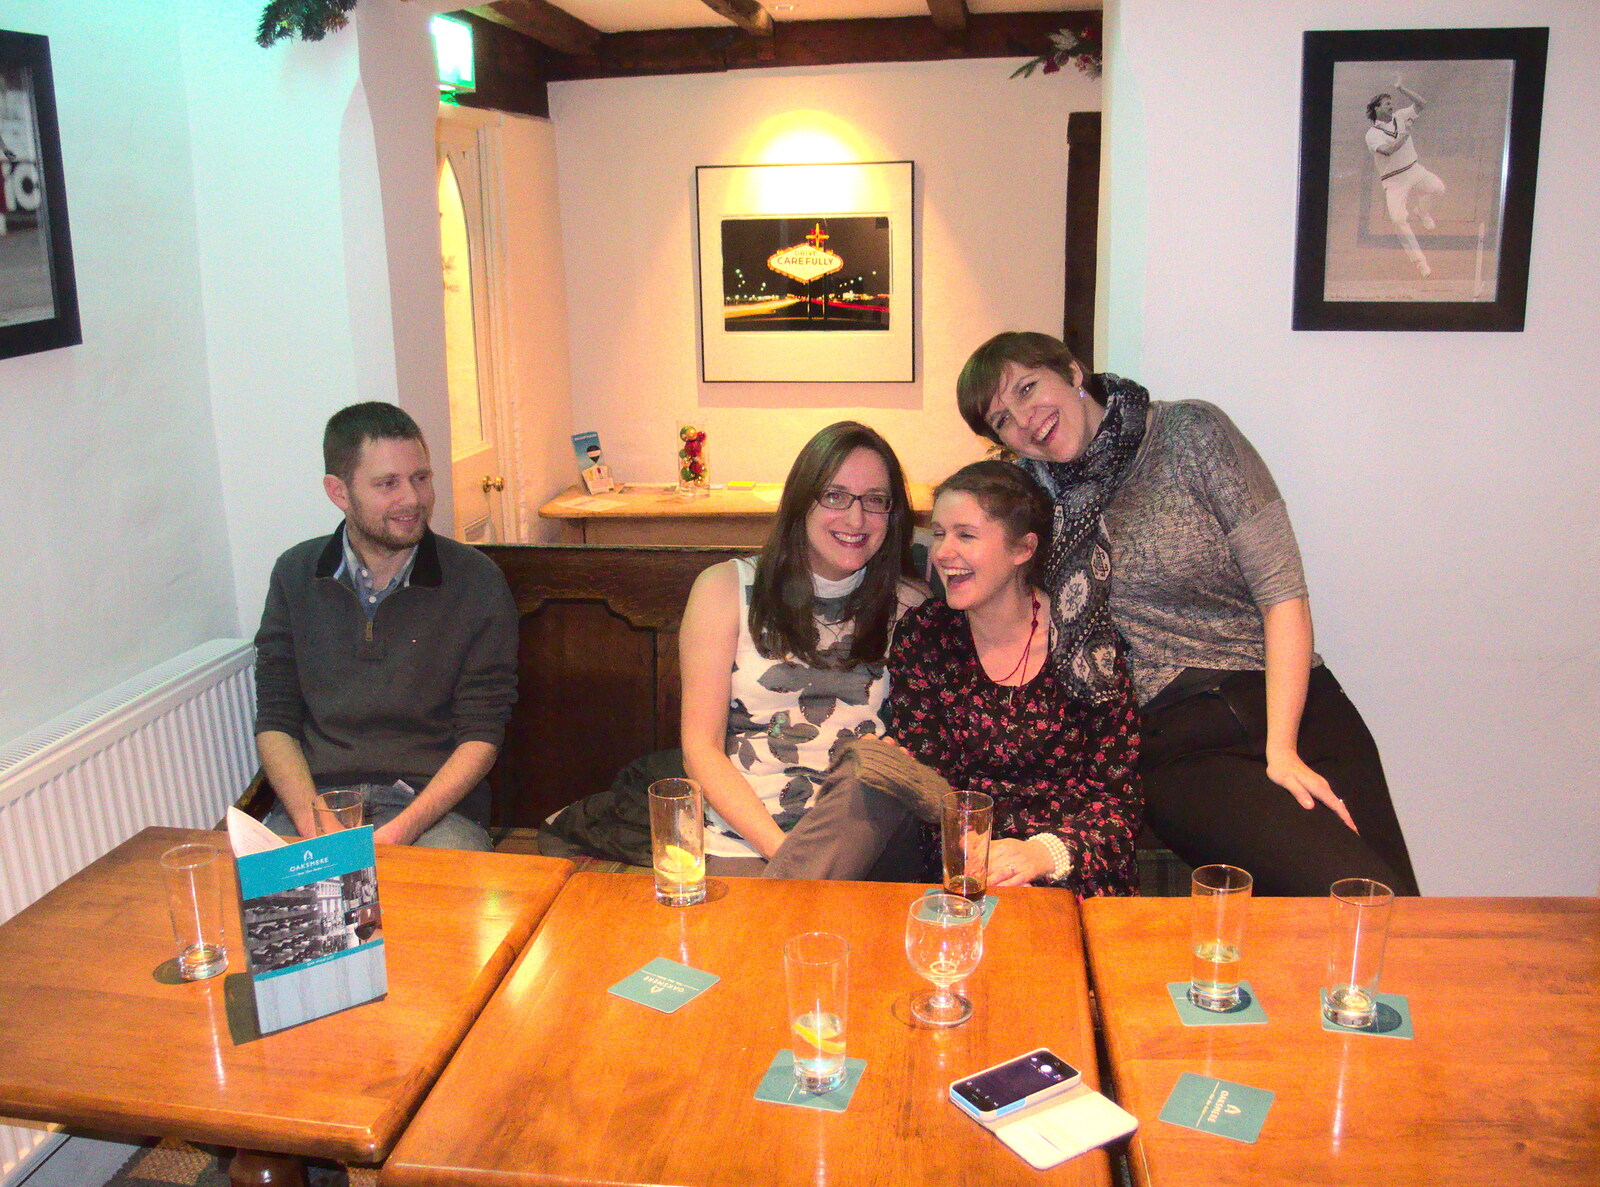 Isobel has a laff from New Year's Eve at the Oaksmere, Brome, Suffolk - 31st December 2014